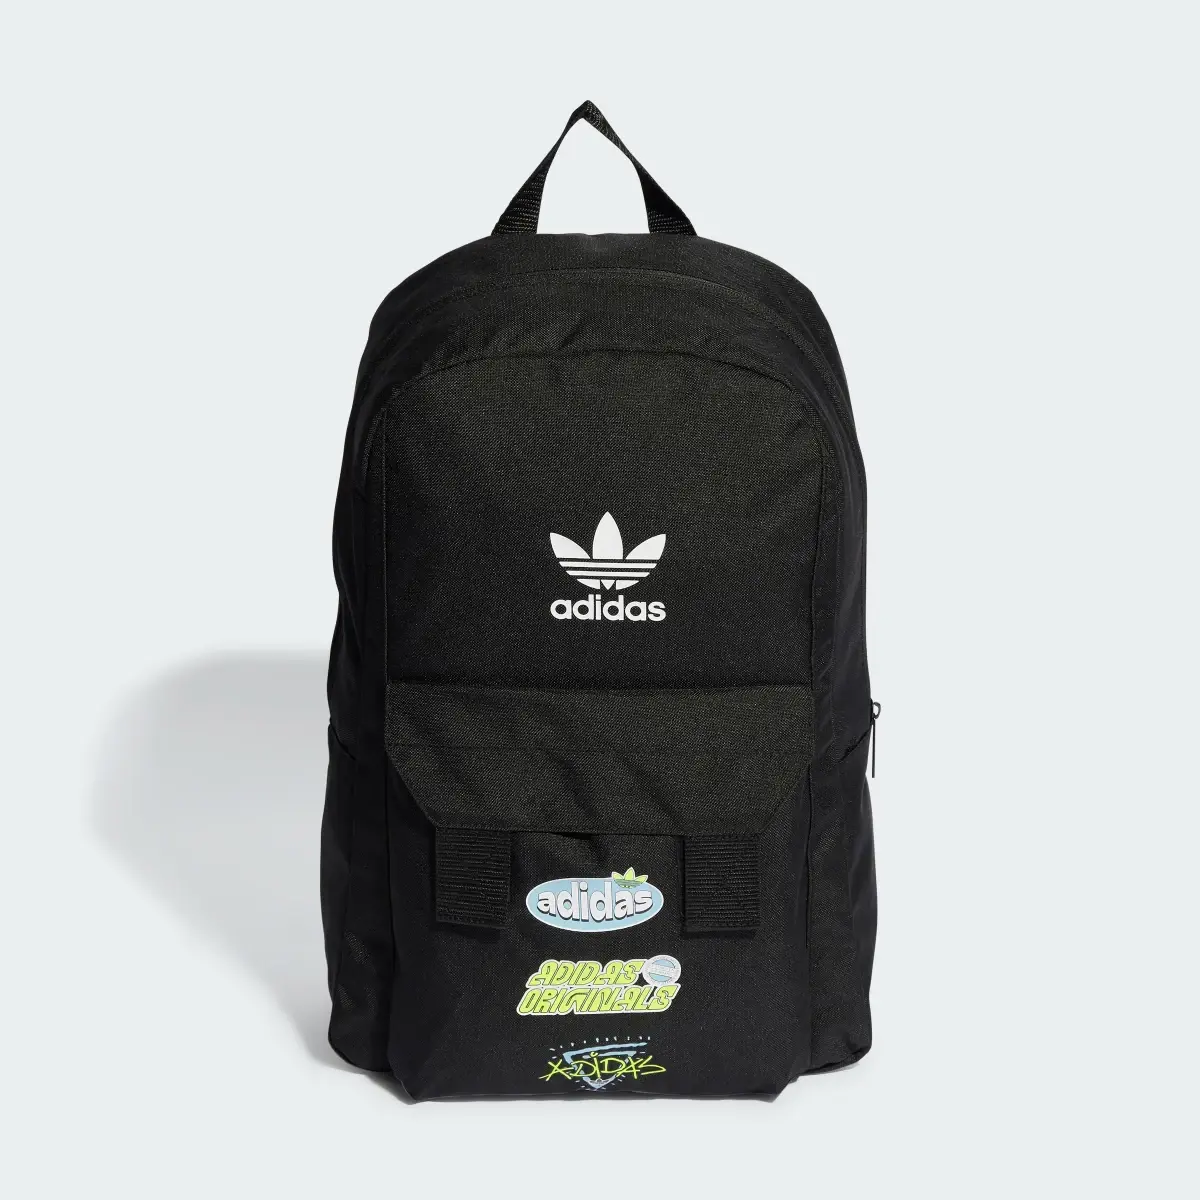 Adidas Graphic Youth Backpack. 2